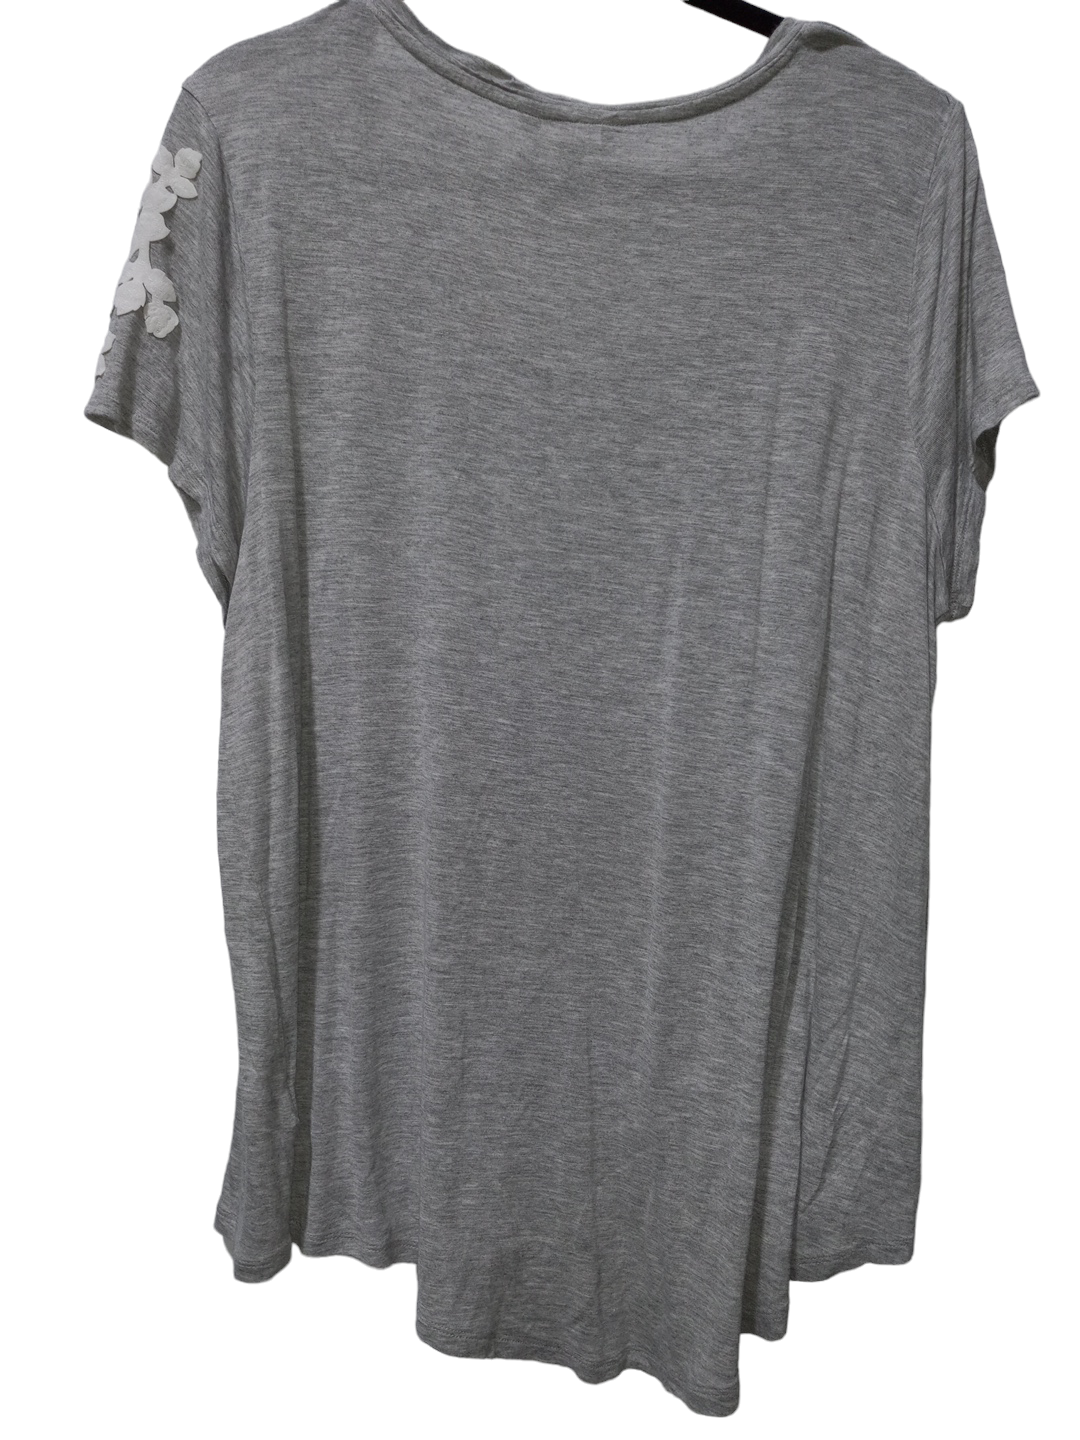 Grey & White Top Short Sleeve Simply Vera, Size 2x